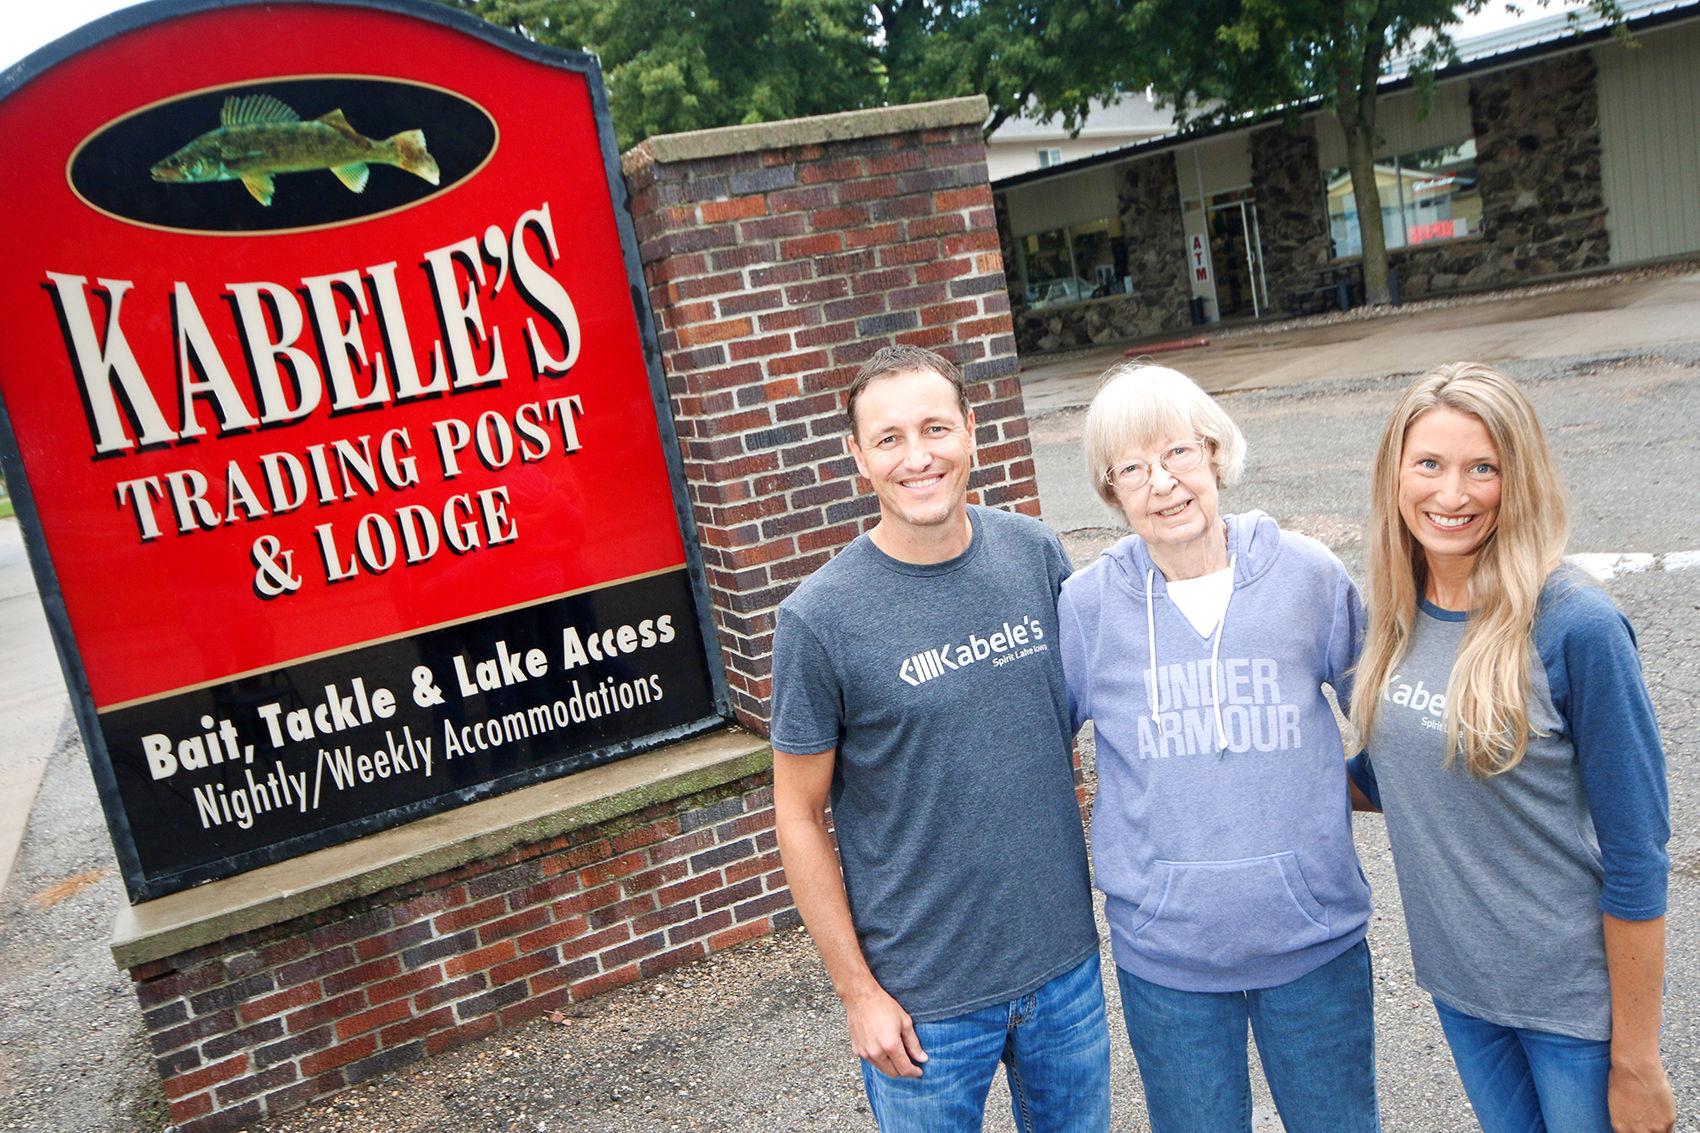 50 Years in the Fishing Business: Kabele's Trading Post takes pride in  providing for anglers, People